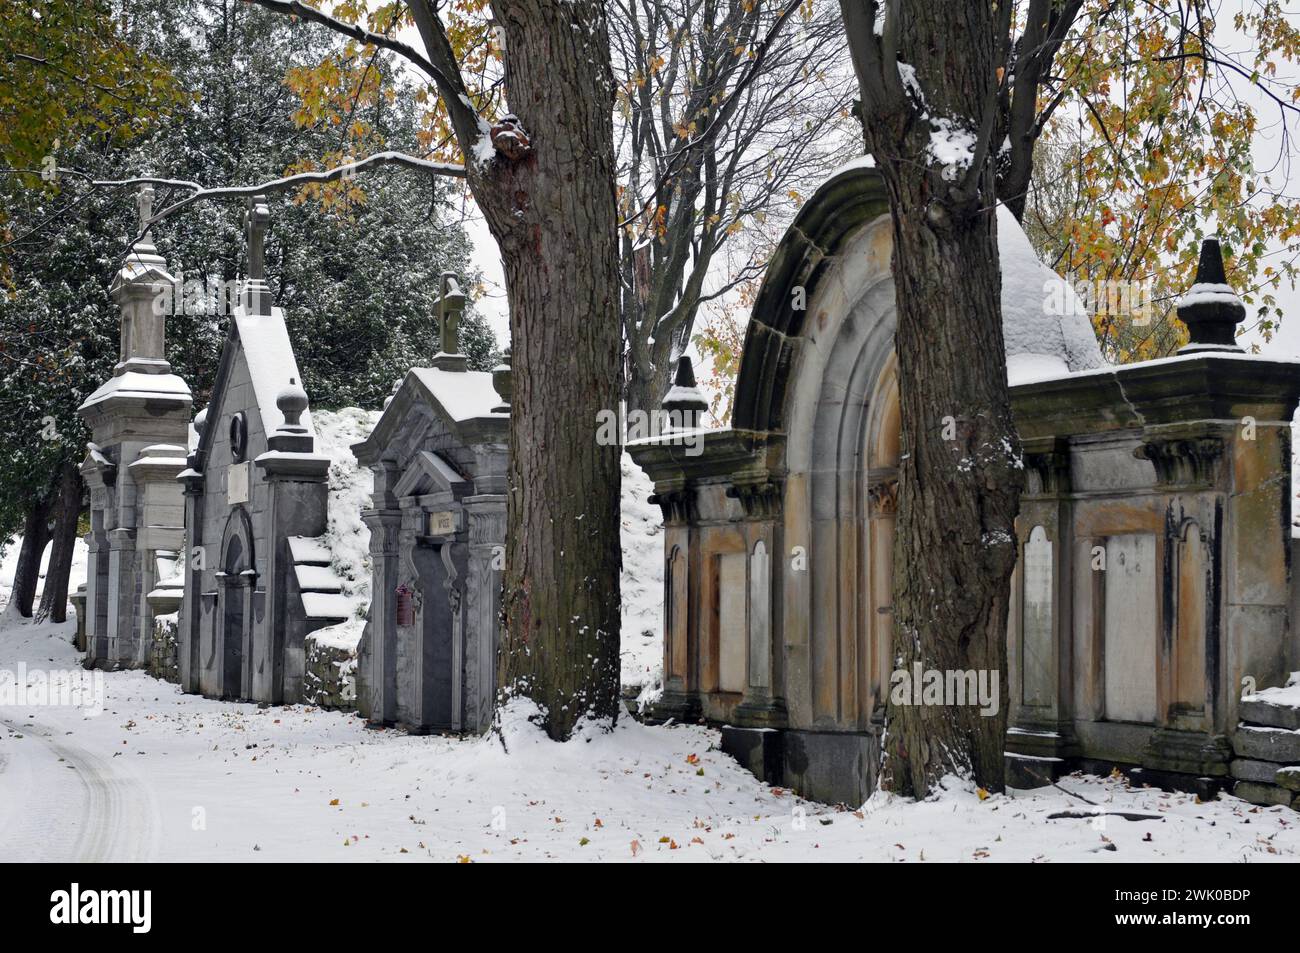 Snow covers a row of historic mausoleums at Montreal's Notre-Dame-des-Neiges Cemetery, the largest in Canada. Stock Photo